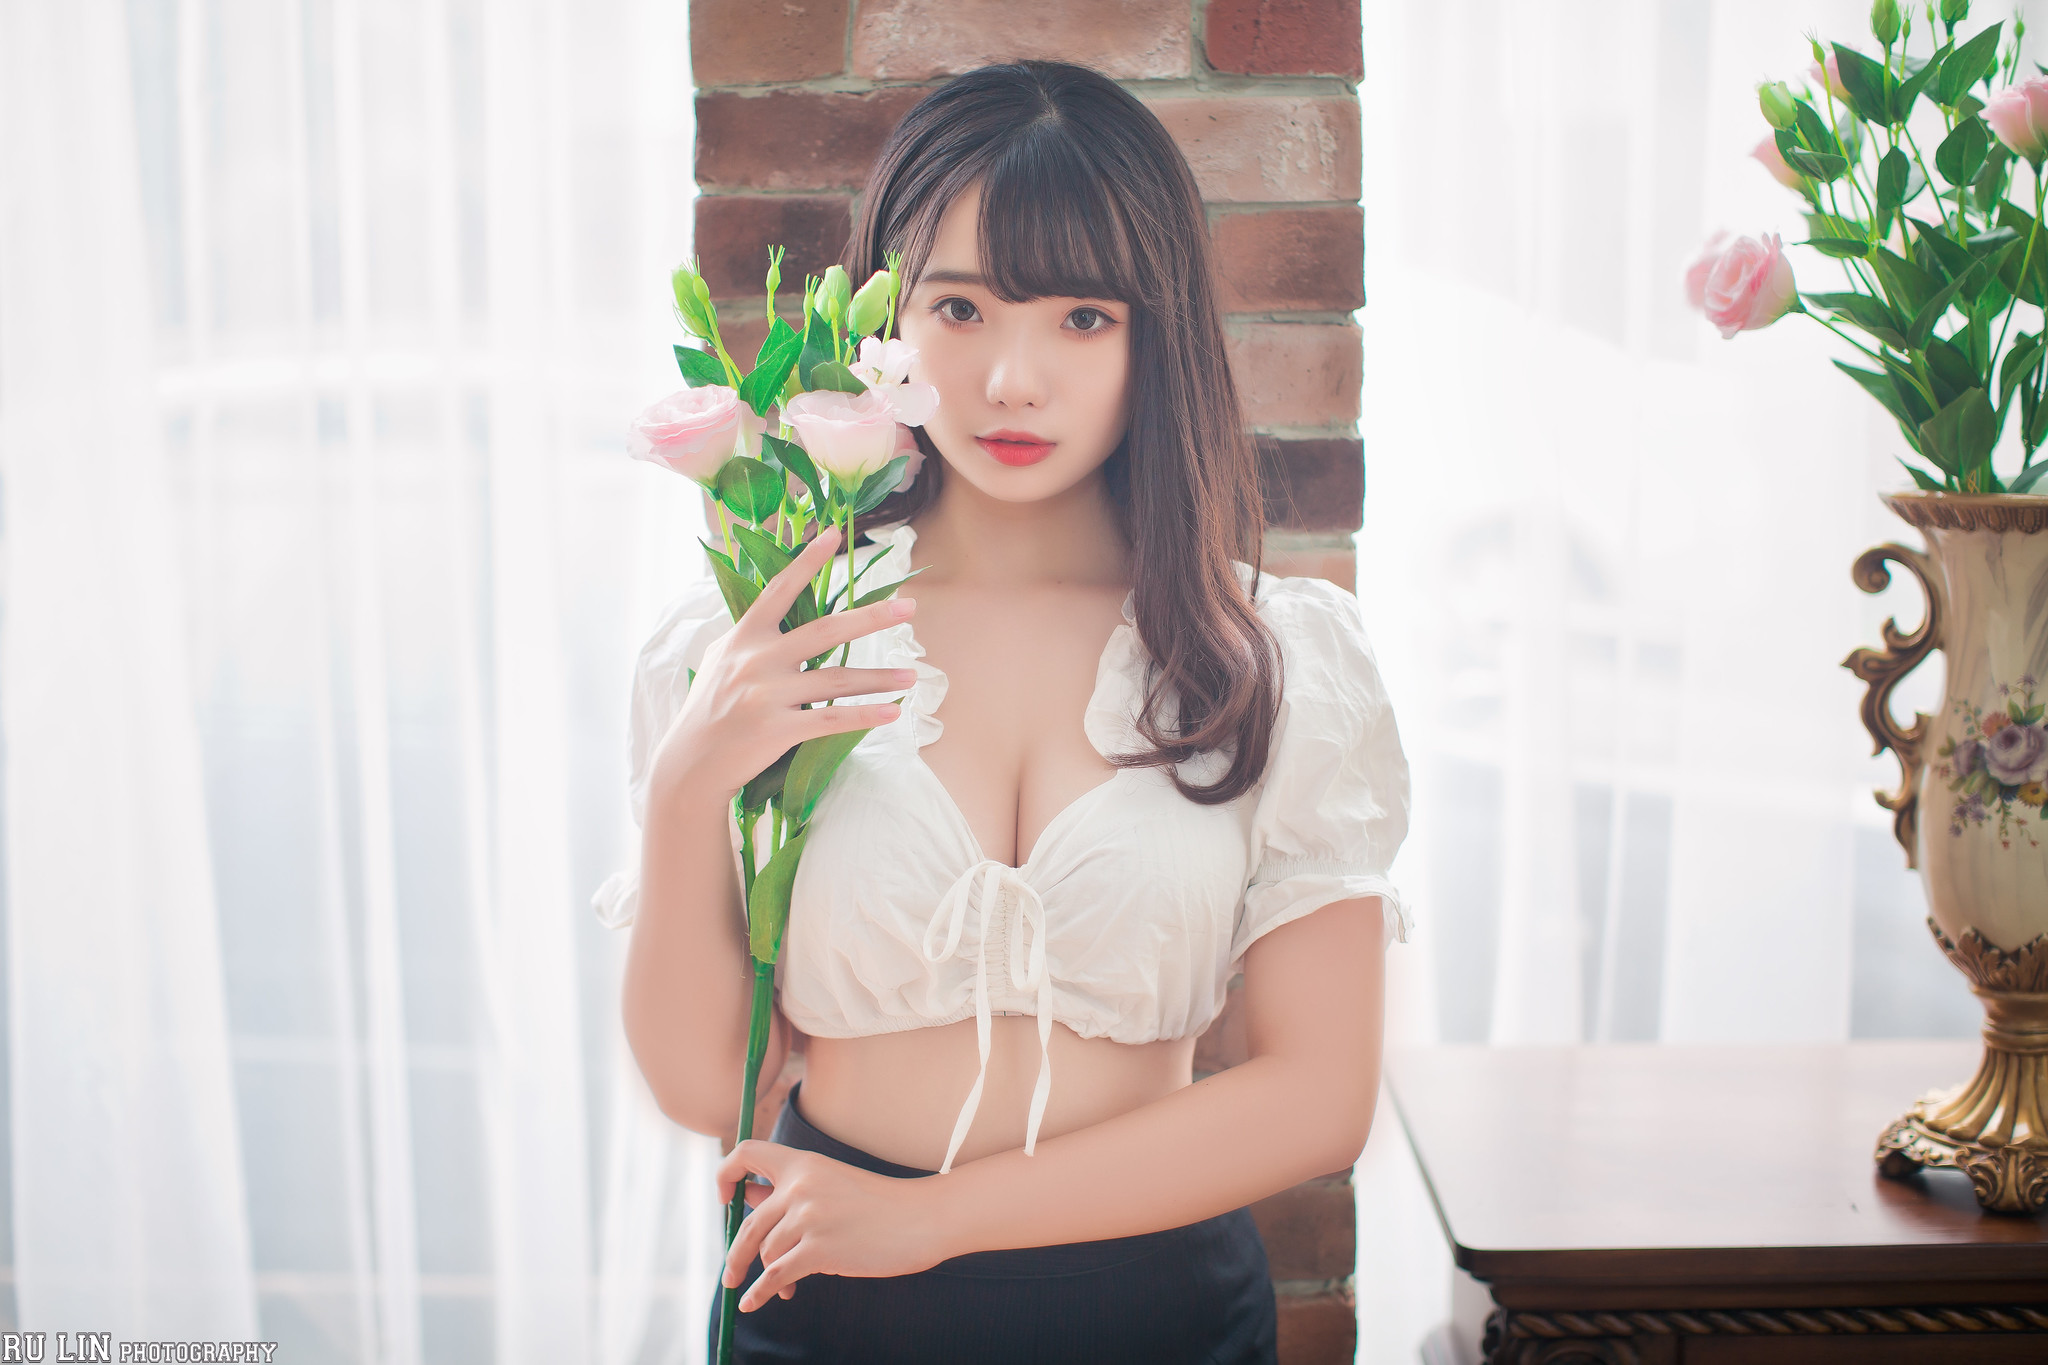 People 2048x1365 Ning Shioulin women model Asian portrait display looking at viewer red lipstick white tops cleavage flowers curtains indoors women indoors